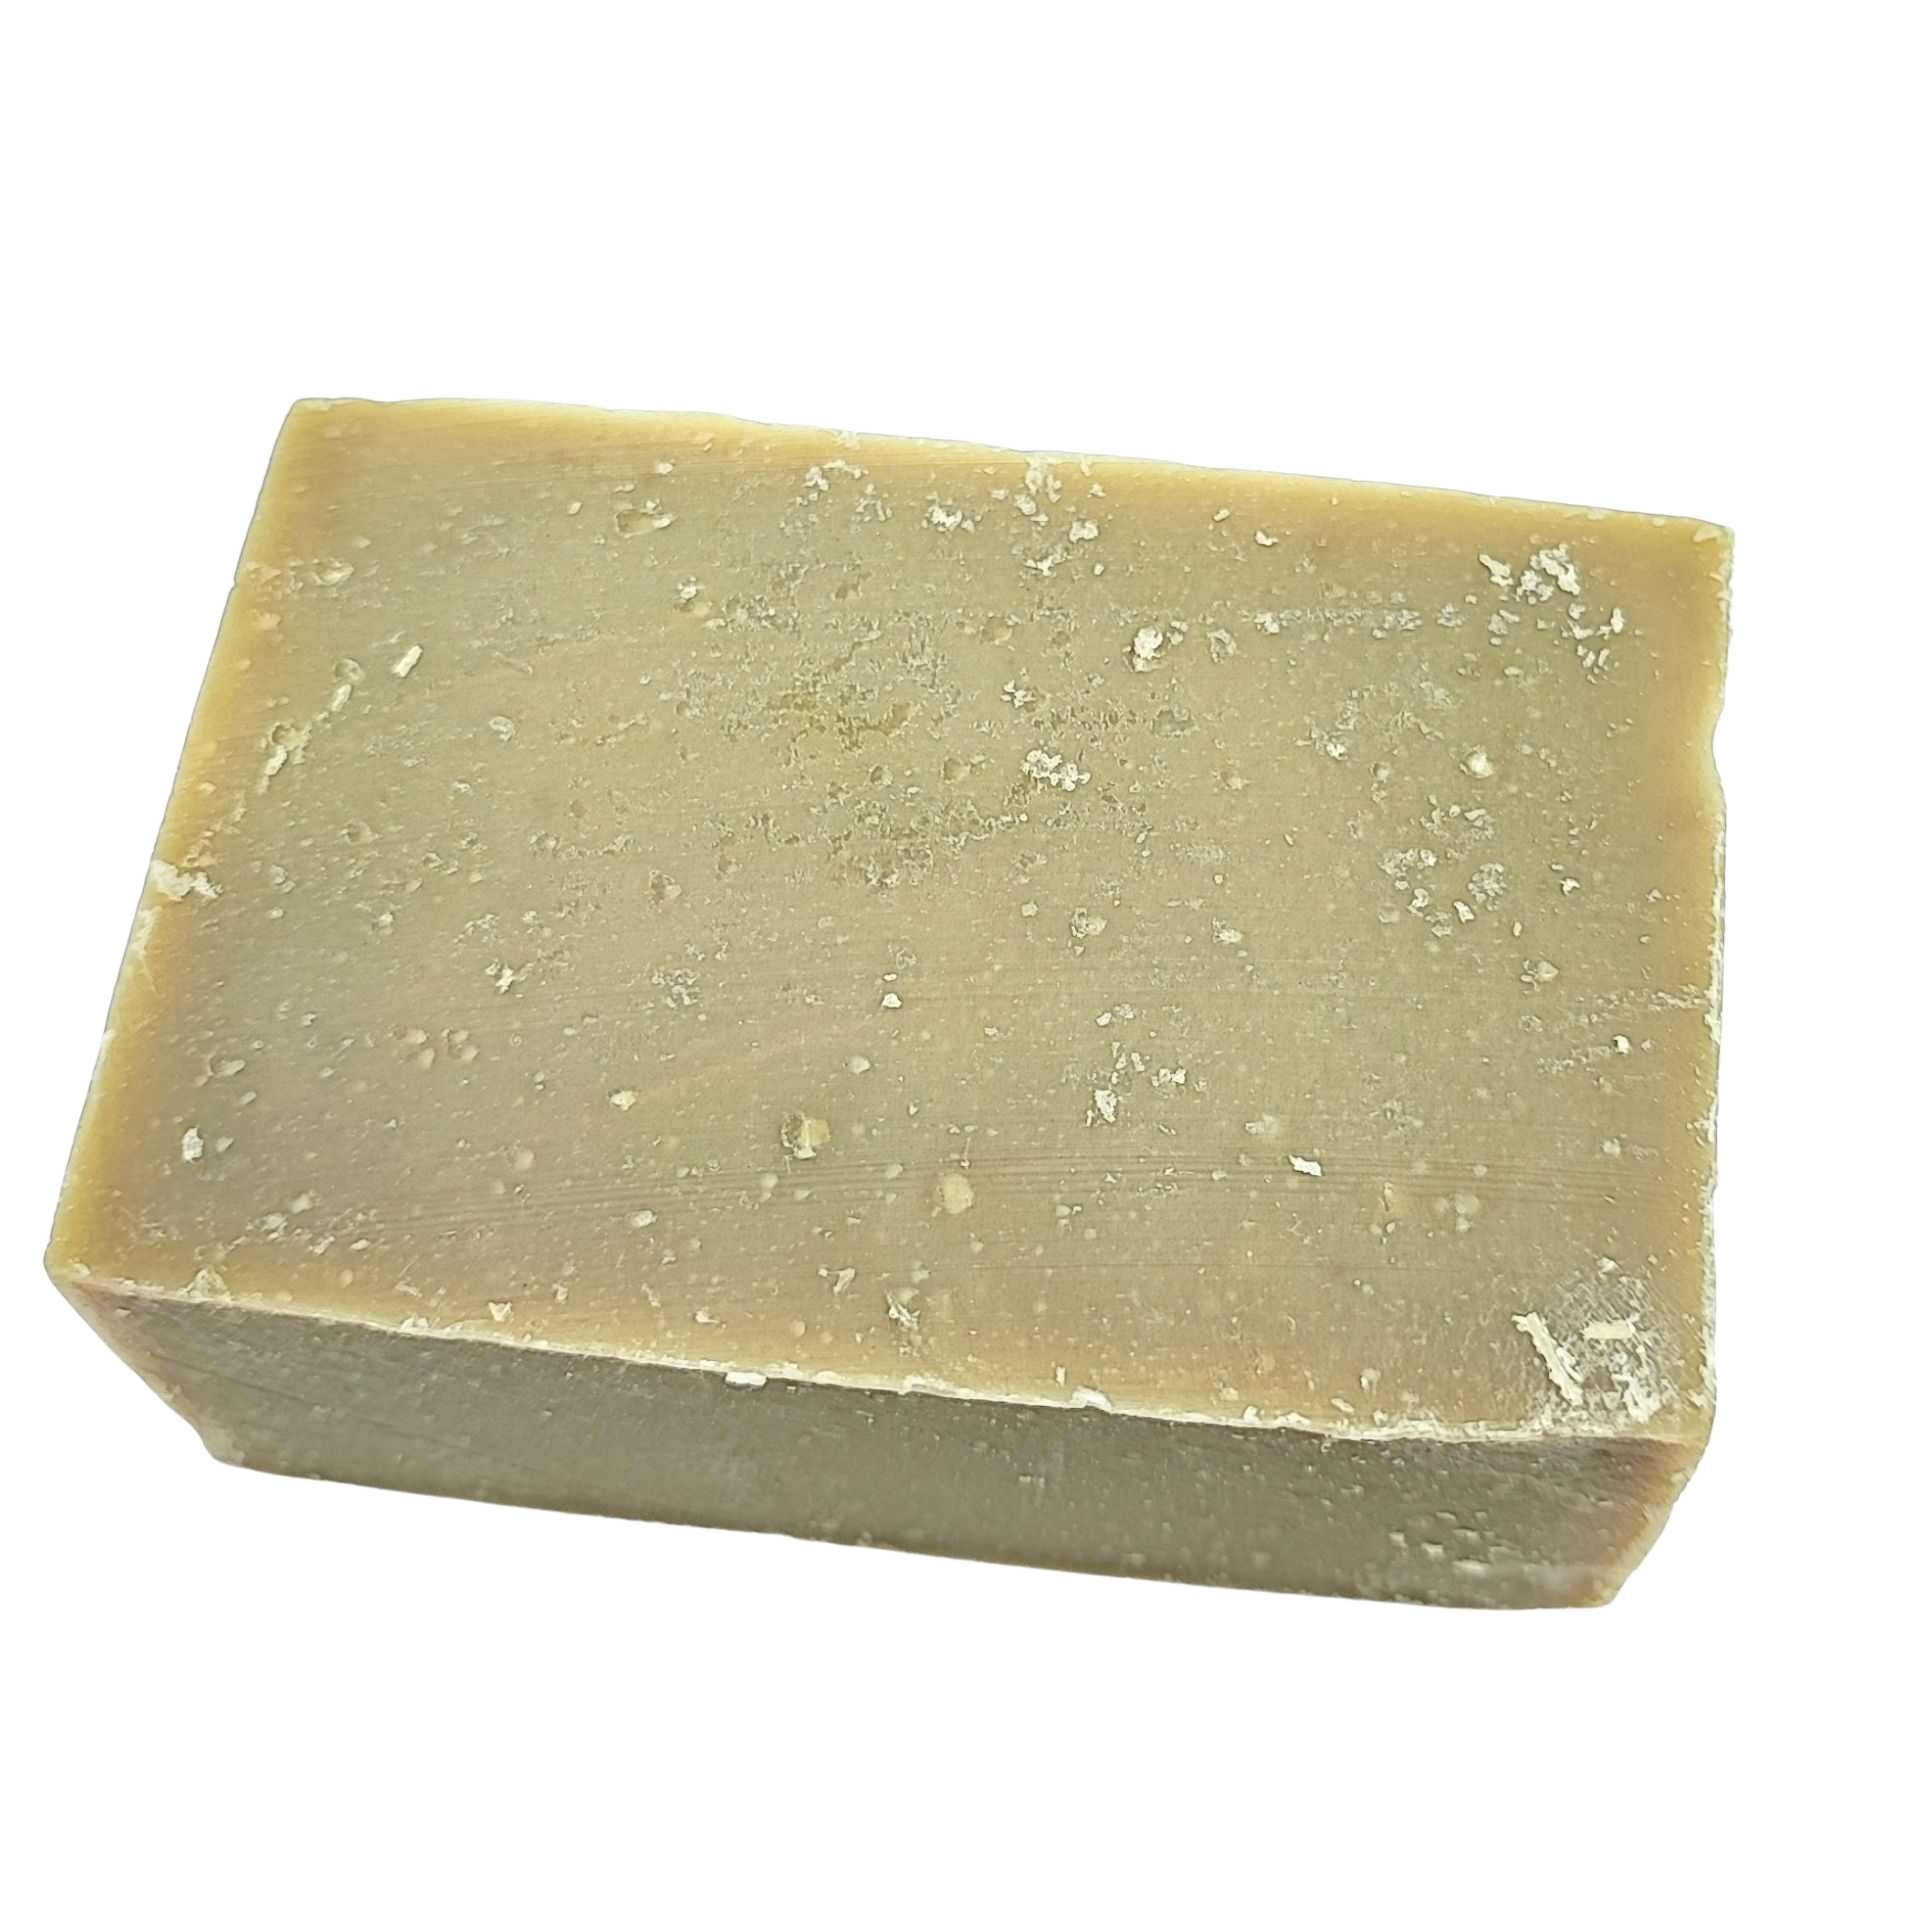 Soap Bar -Tobacco Leaves -5oz/140g -Woody Scent -Aromes Evasions 